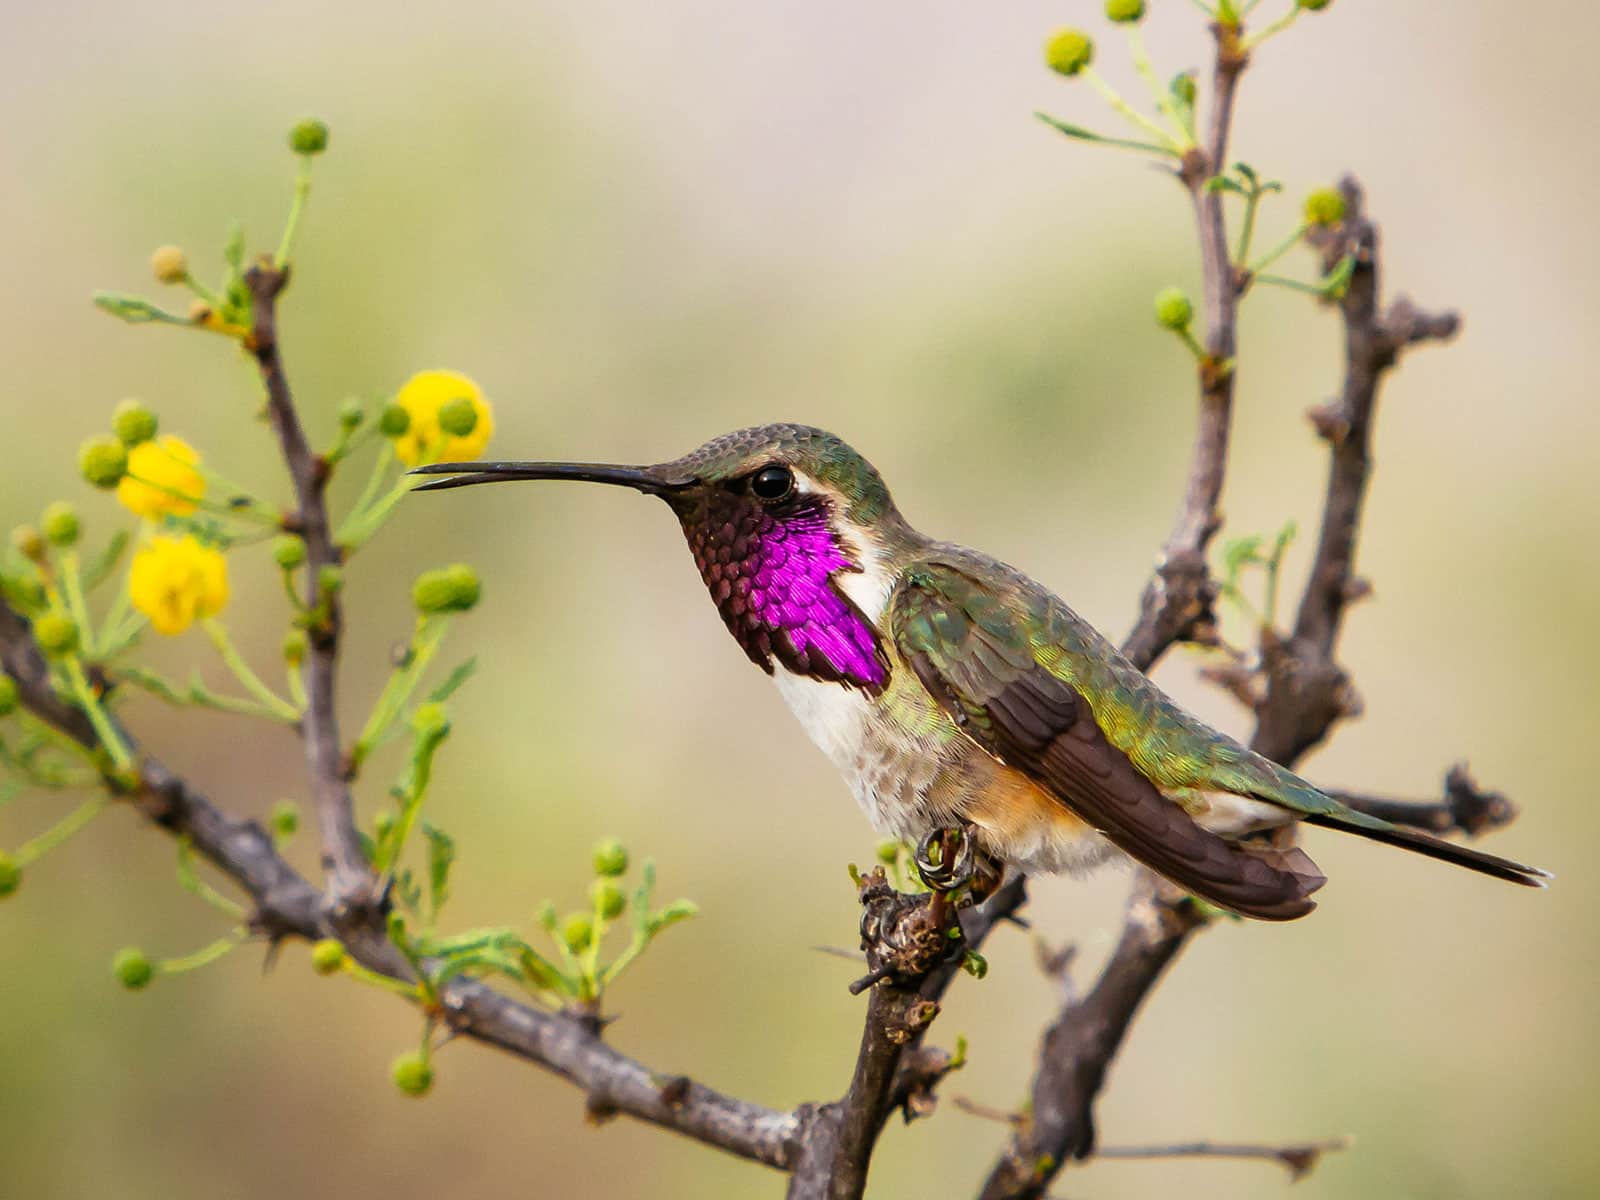 Lucifer hummingbird sitting on a tree branch with new green shoots and yellow buds